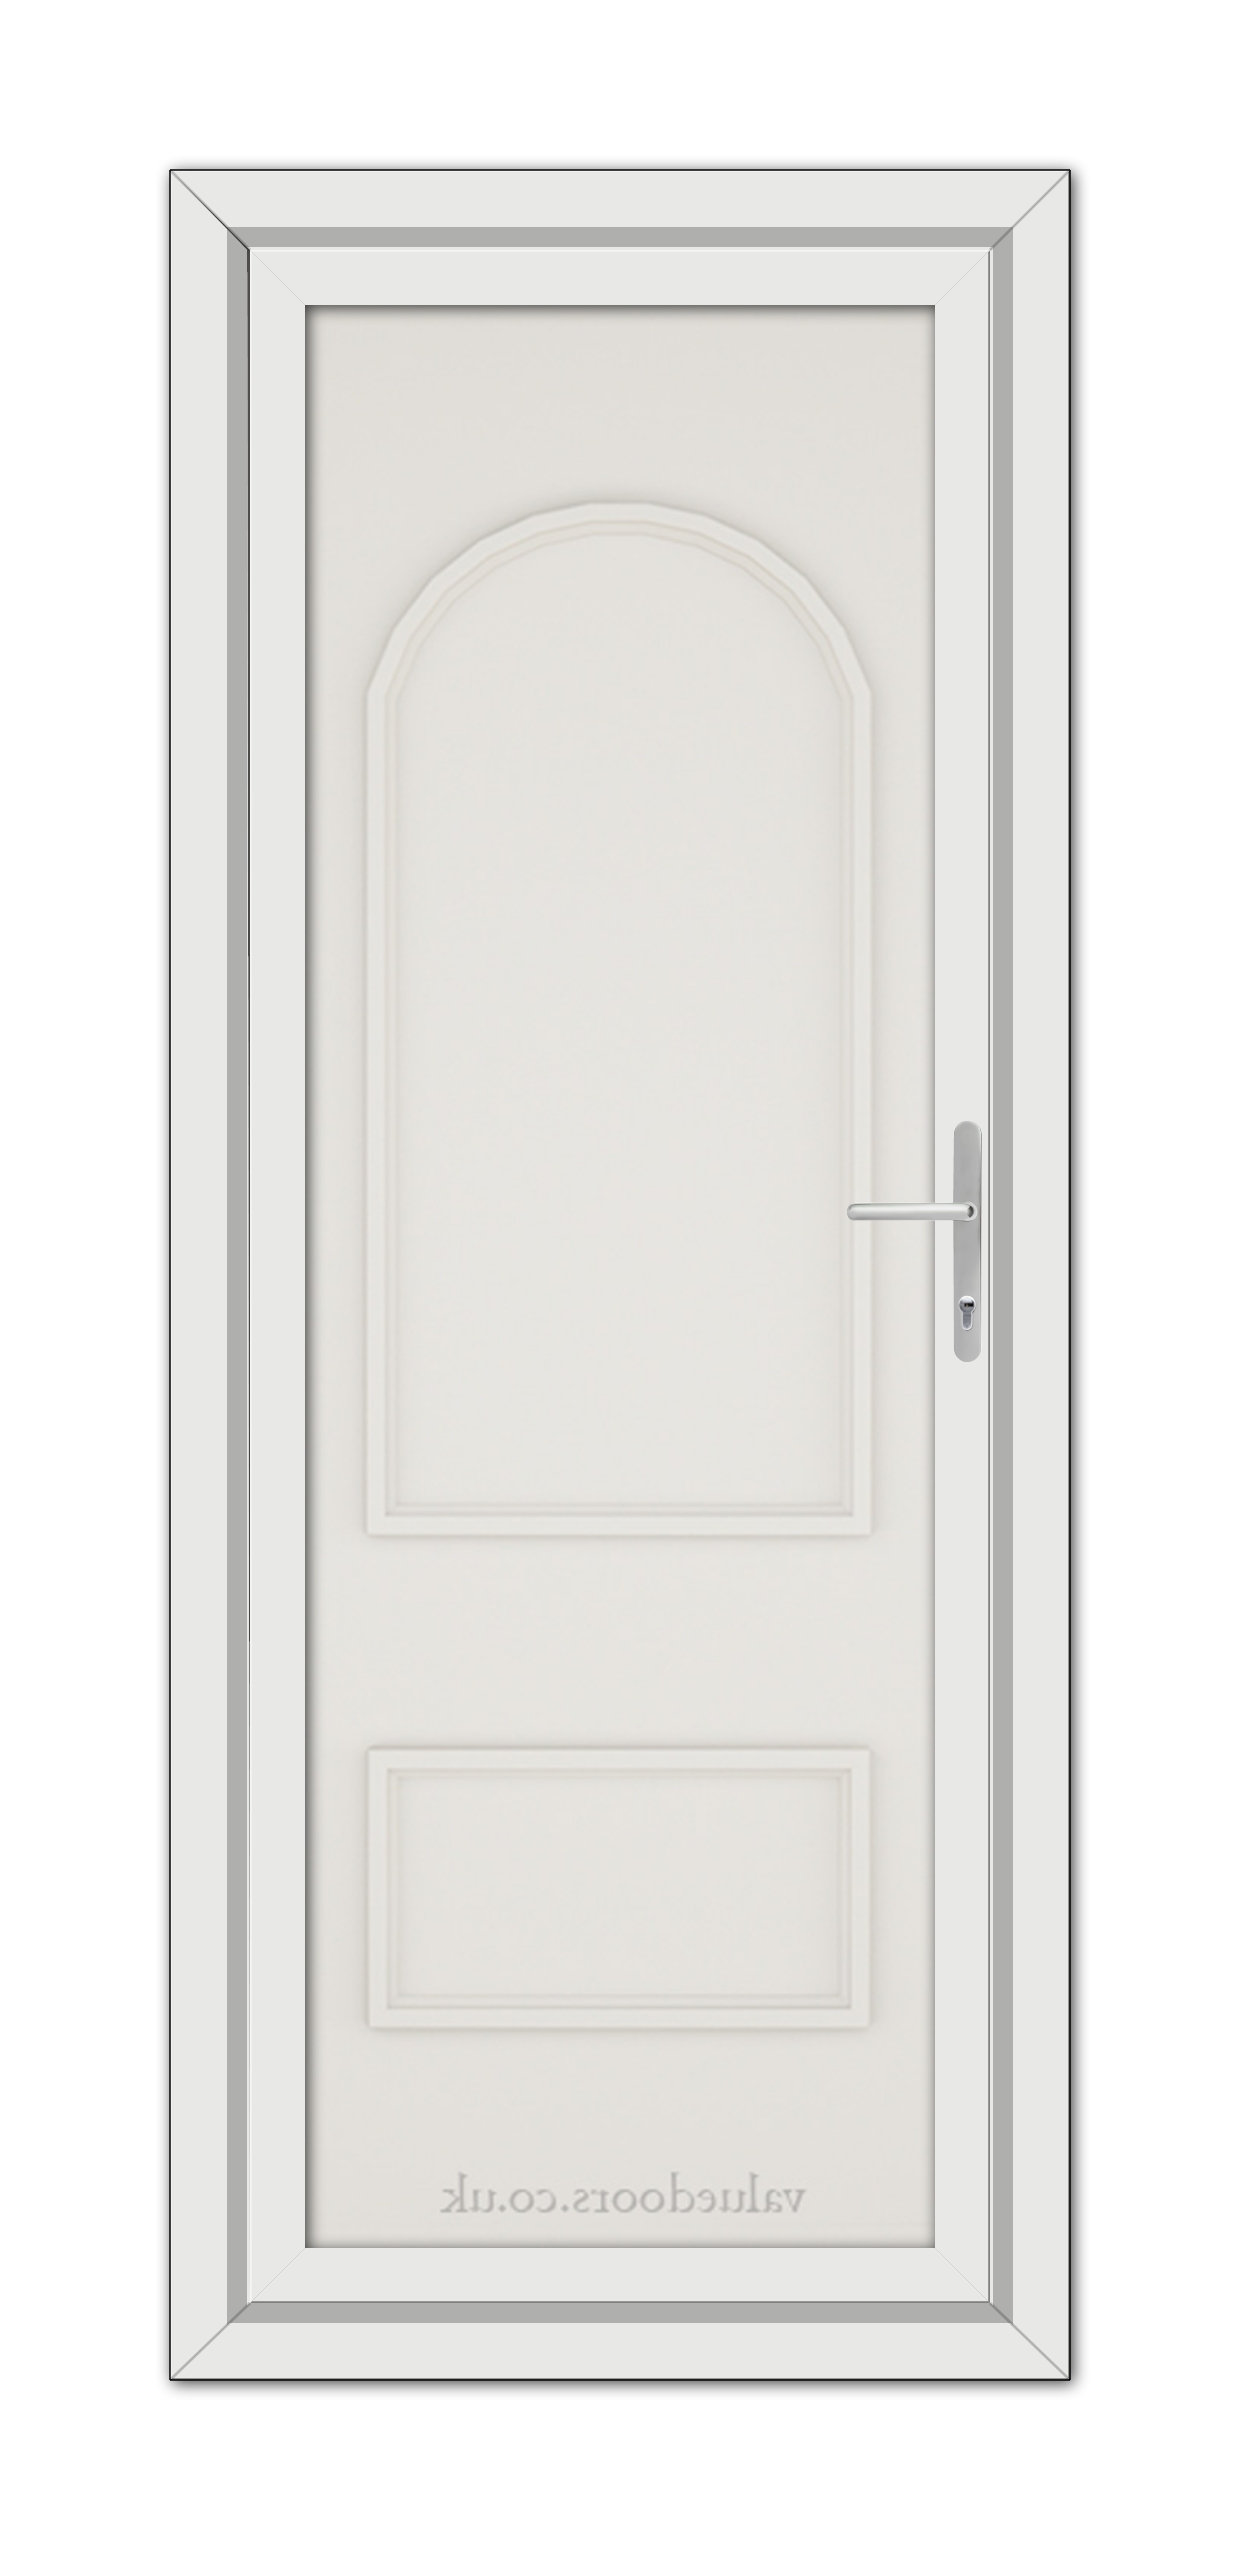 White Cream Rockingham Solid uPVC Door in a frame with a metallic handle, positioned vertically, featuring an arched upper panel and a rectangular lower panel.